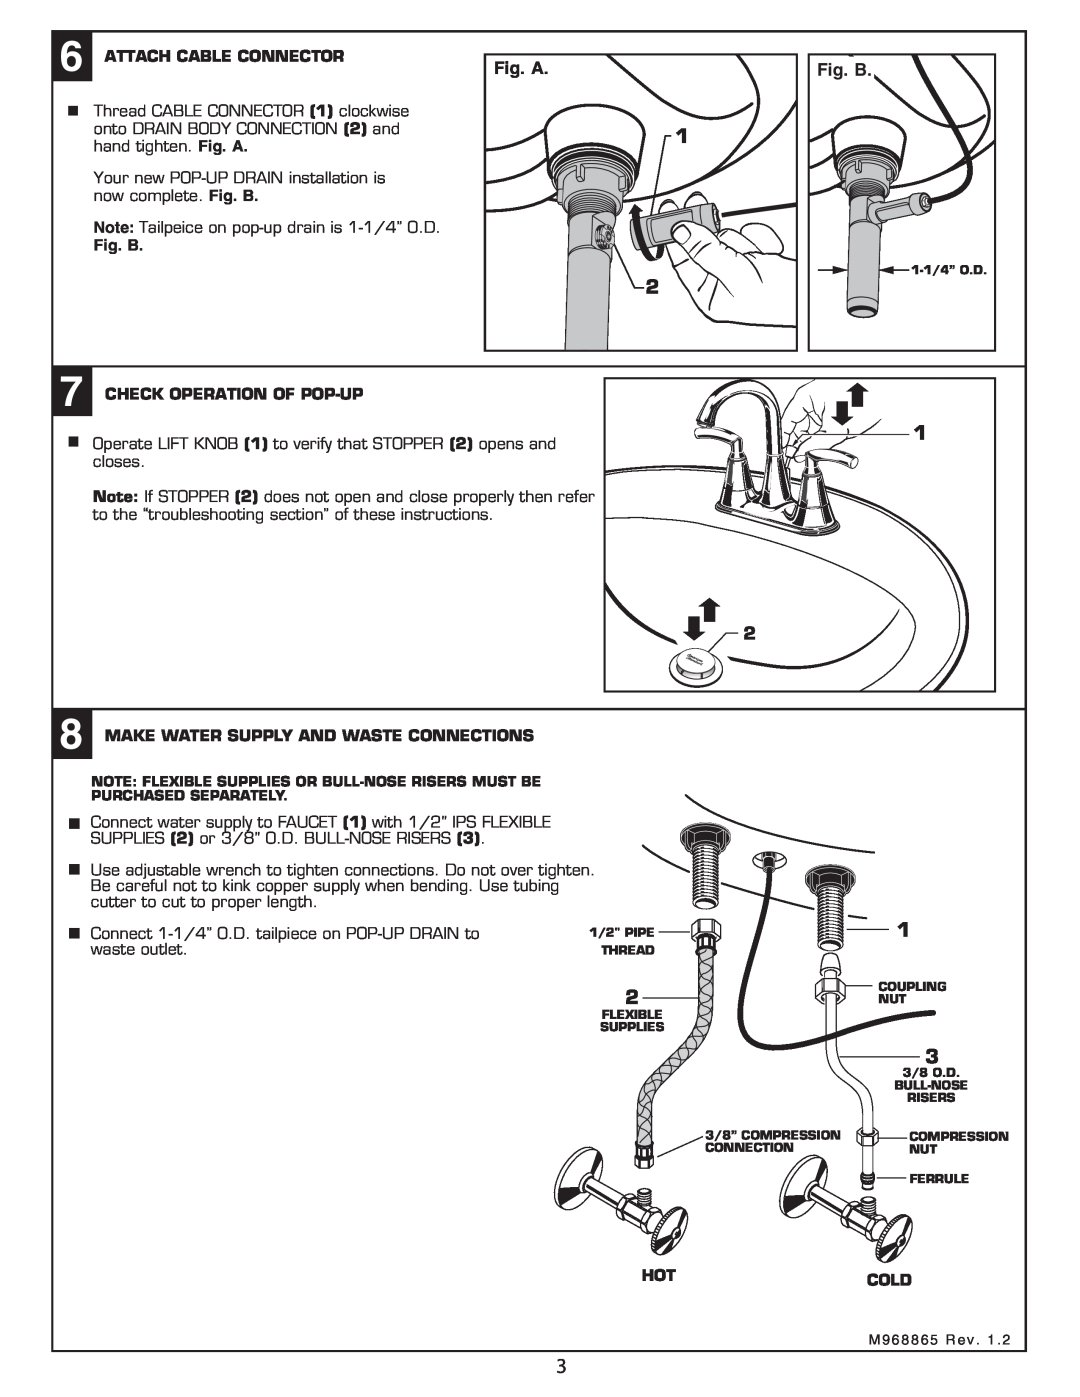 American Standard 7034 installation instructions Fig. A, Fig. B, Attach Cable Connector, Check Operation Of Pop-Up, Hotcold 